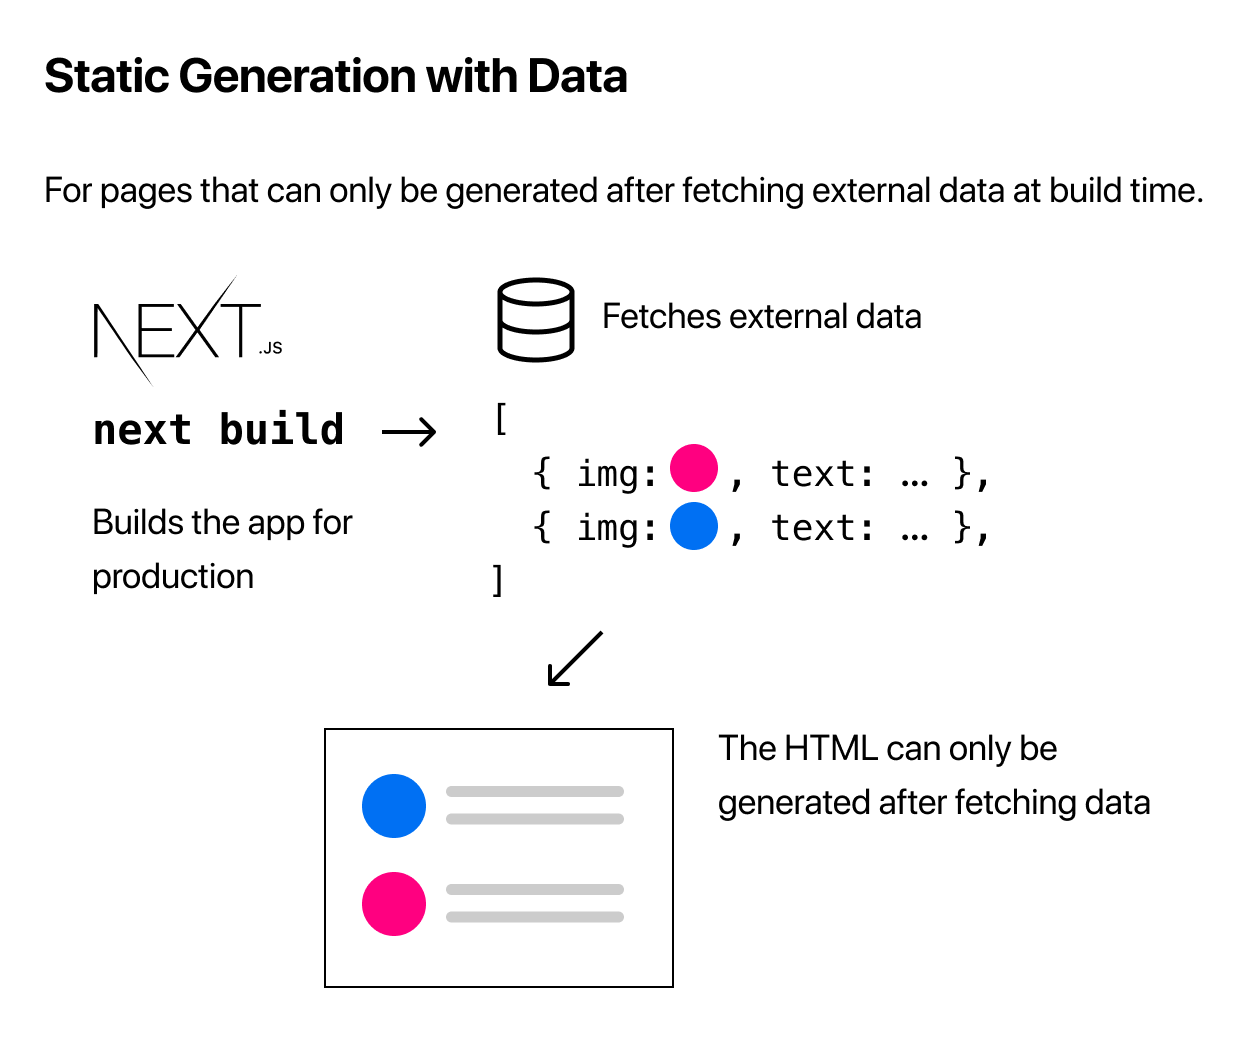 Static site generation with external data (Next.js)